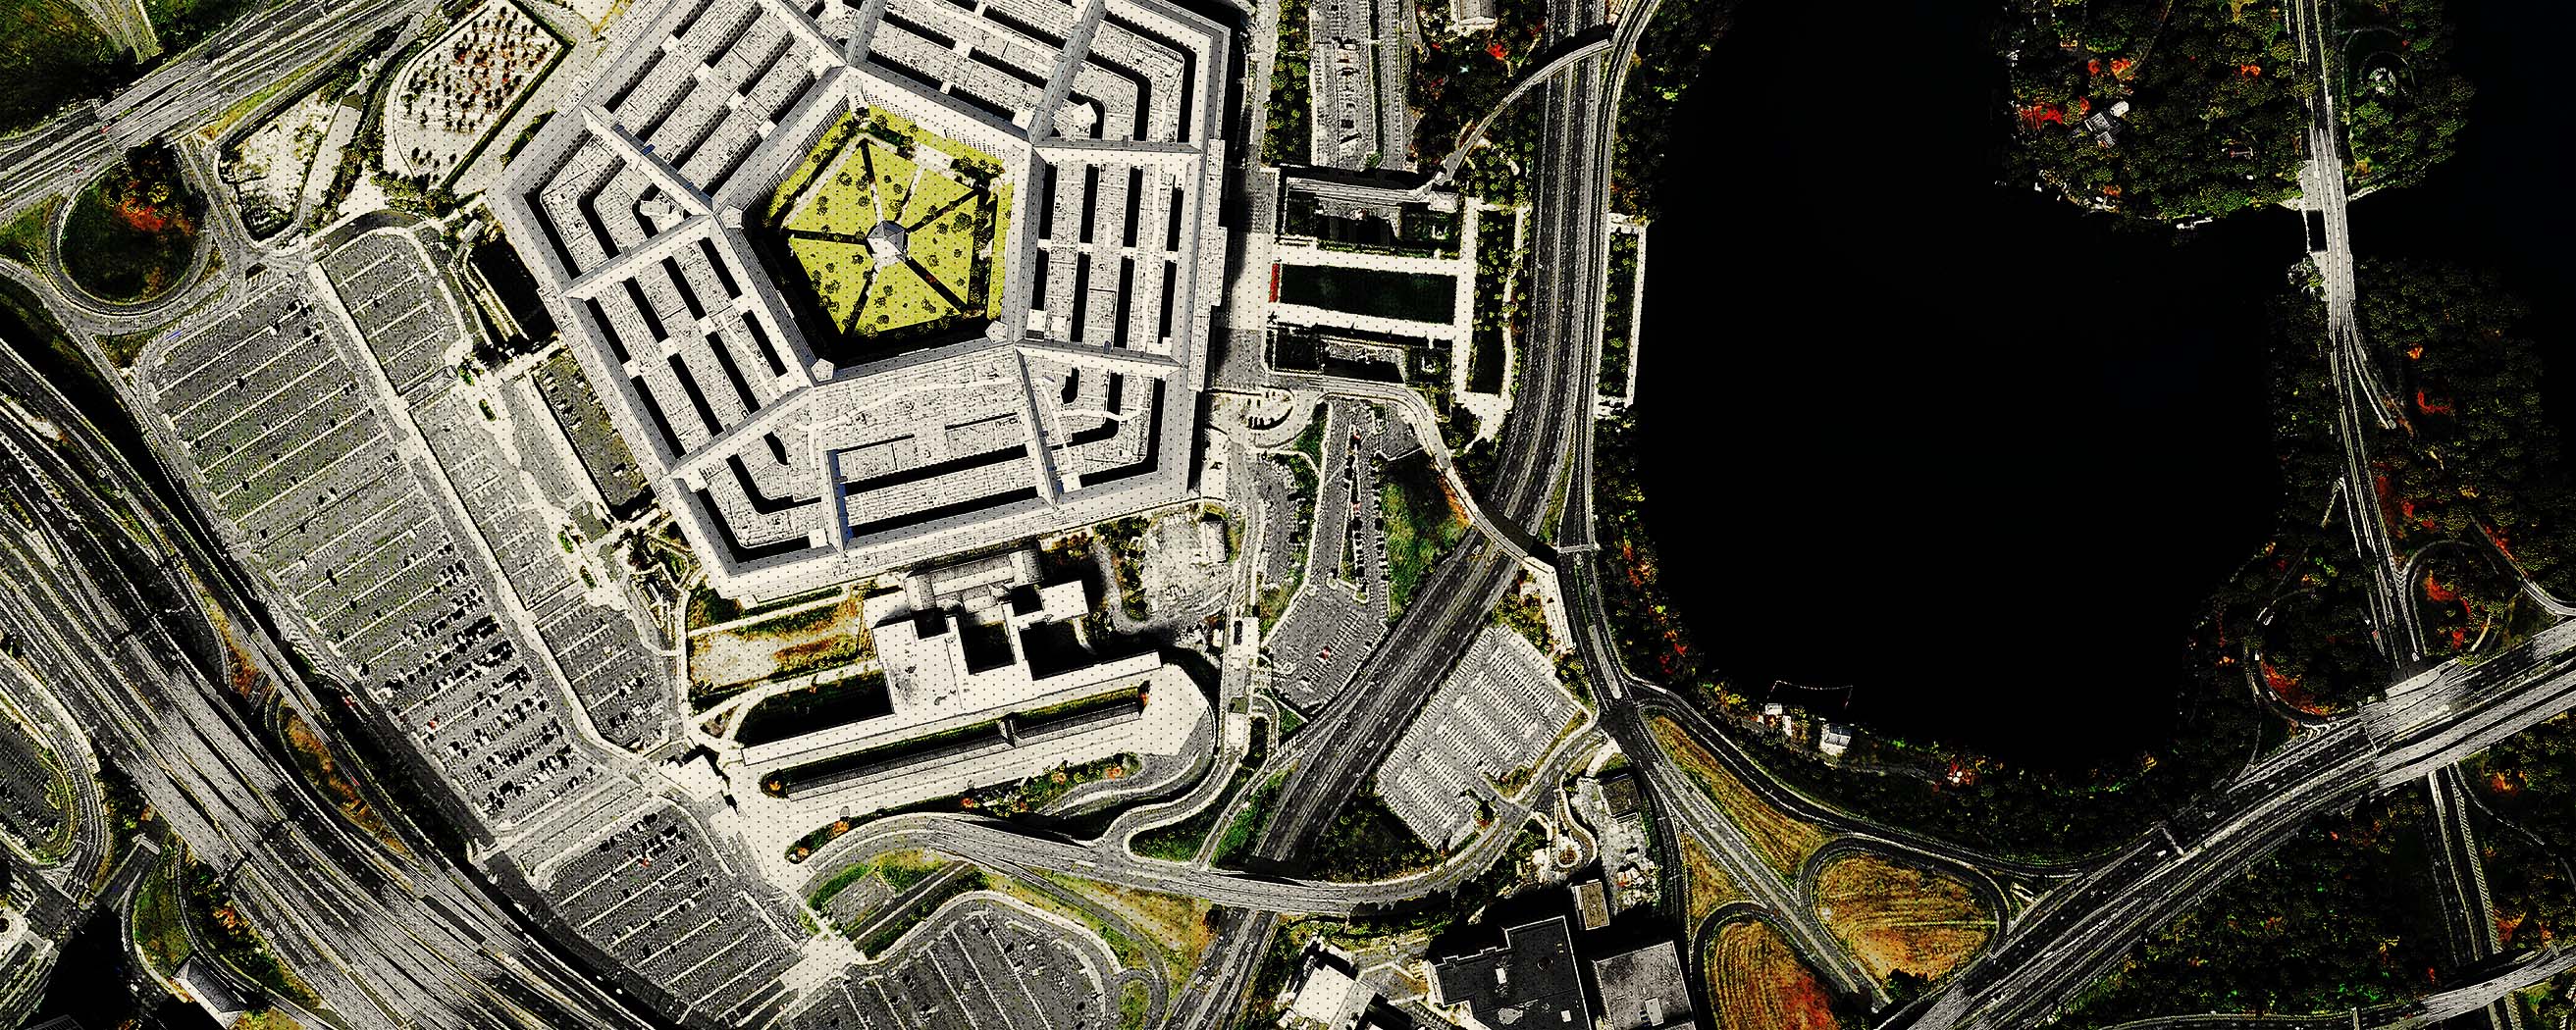 Pentagon building from above